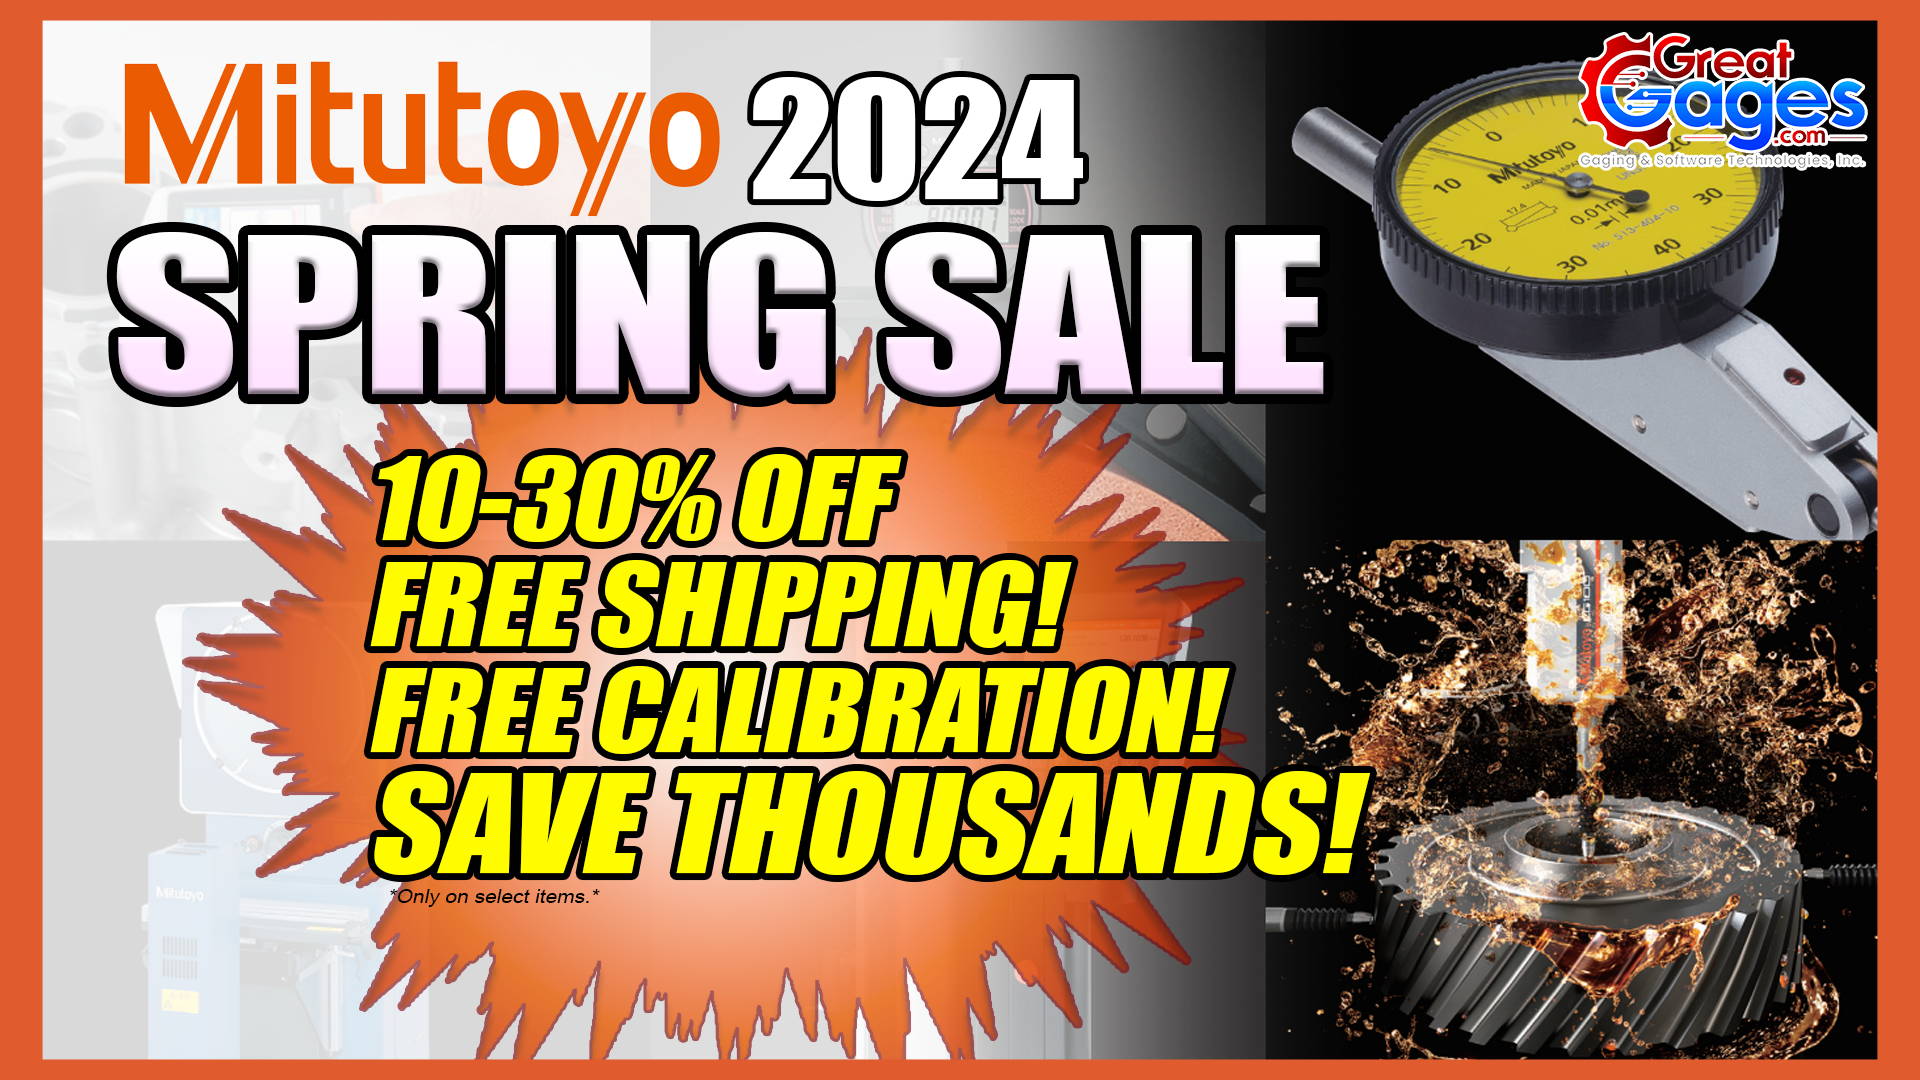 Mitutoyo Spring Promo 2024 at GreatGages.com